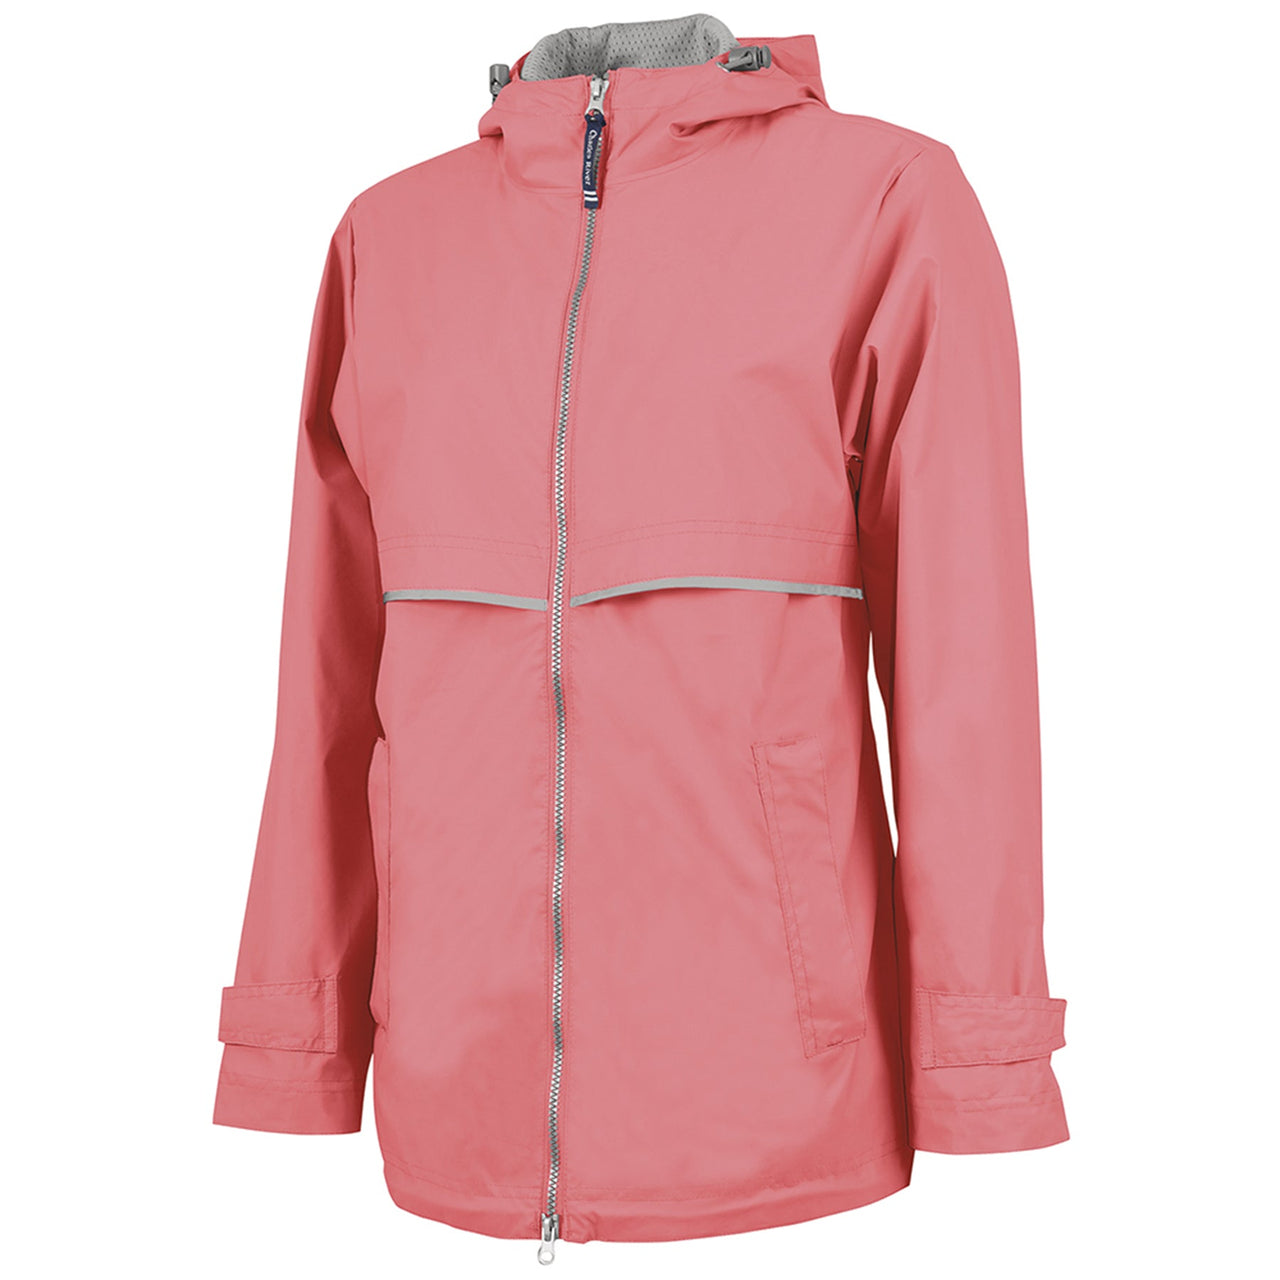 on the front of the coral women's zip-up windbreaker jacket is a reflective zipper